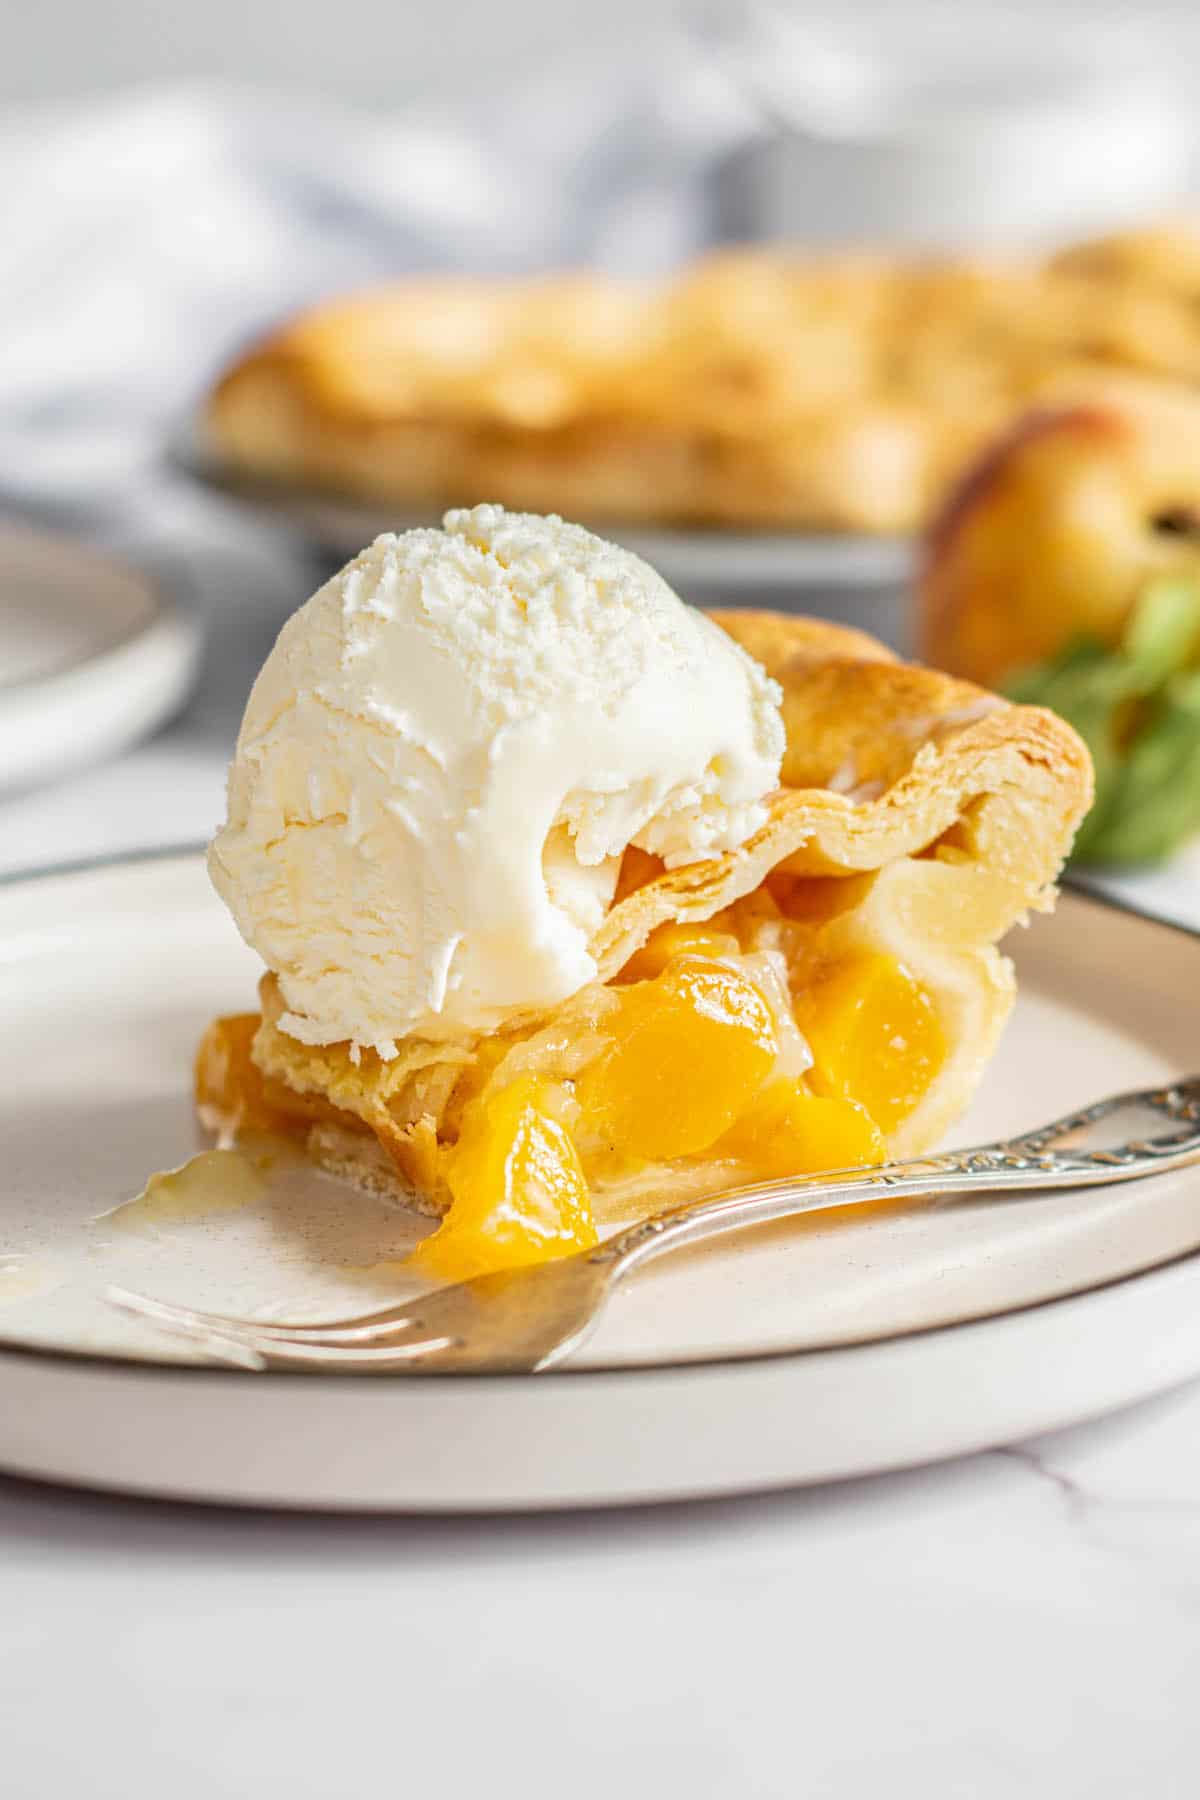 a slice of peach with a scoop of ice cream.